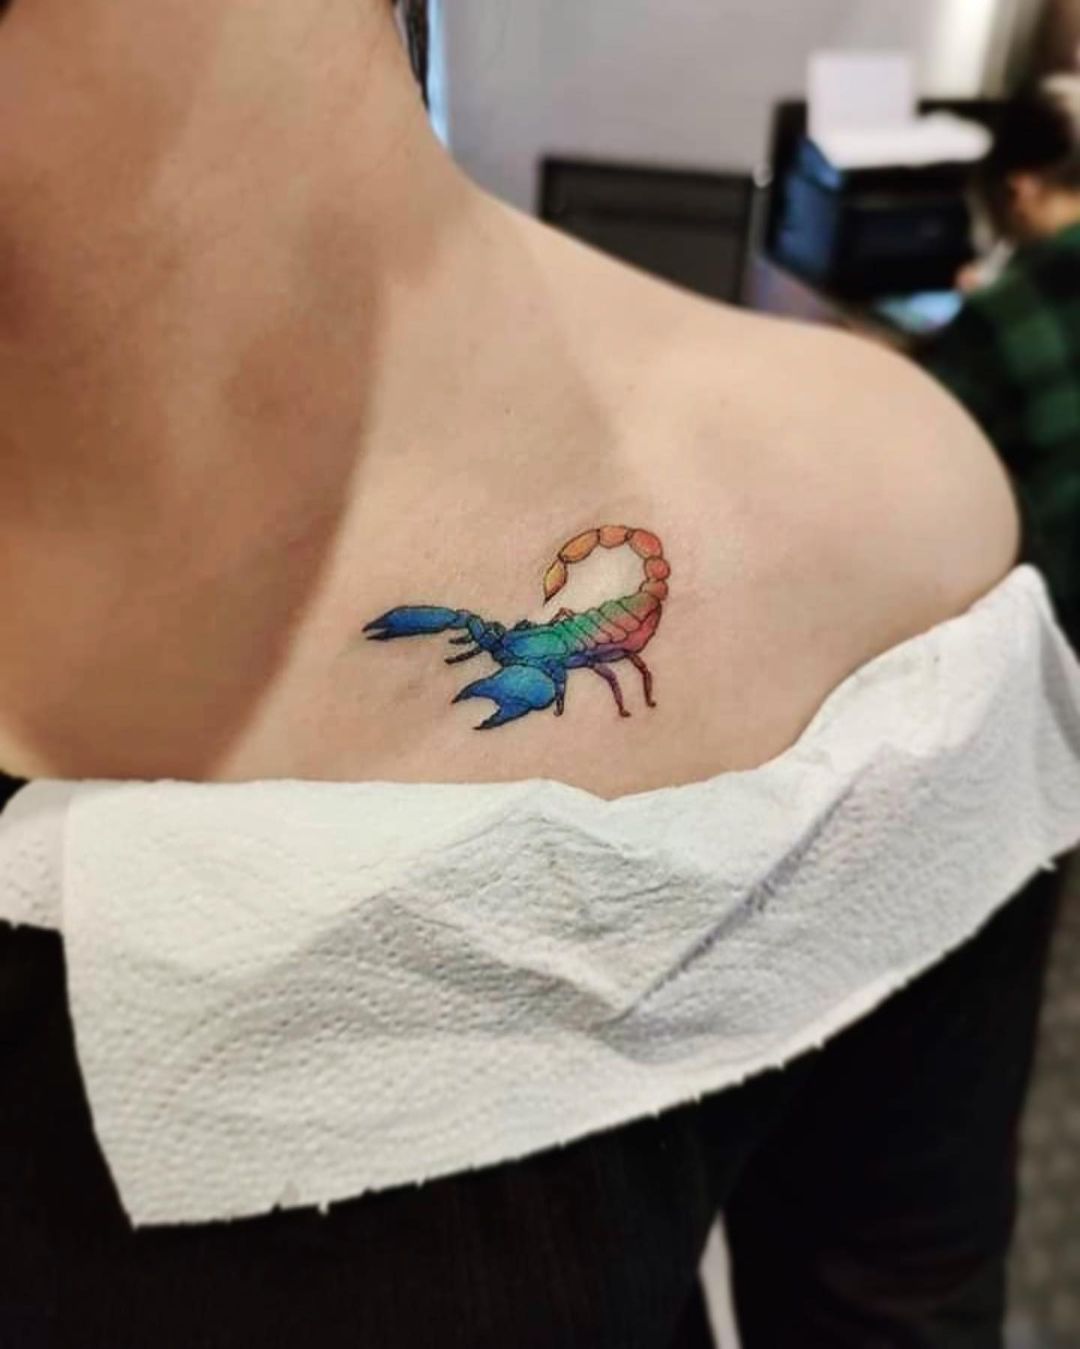 25 Stinging Scorpio Tattoos That Are Heavy on Mystery and Mood